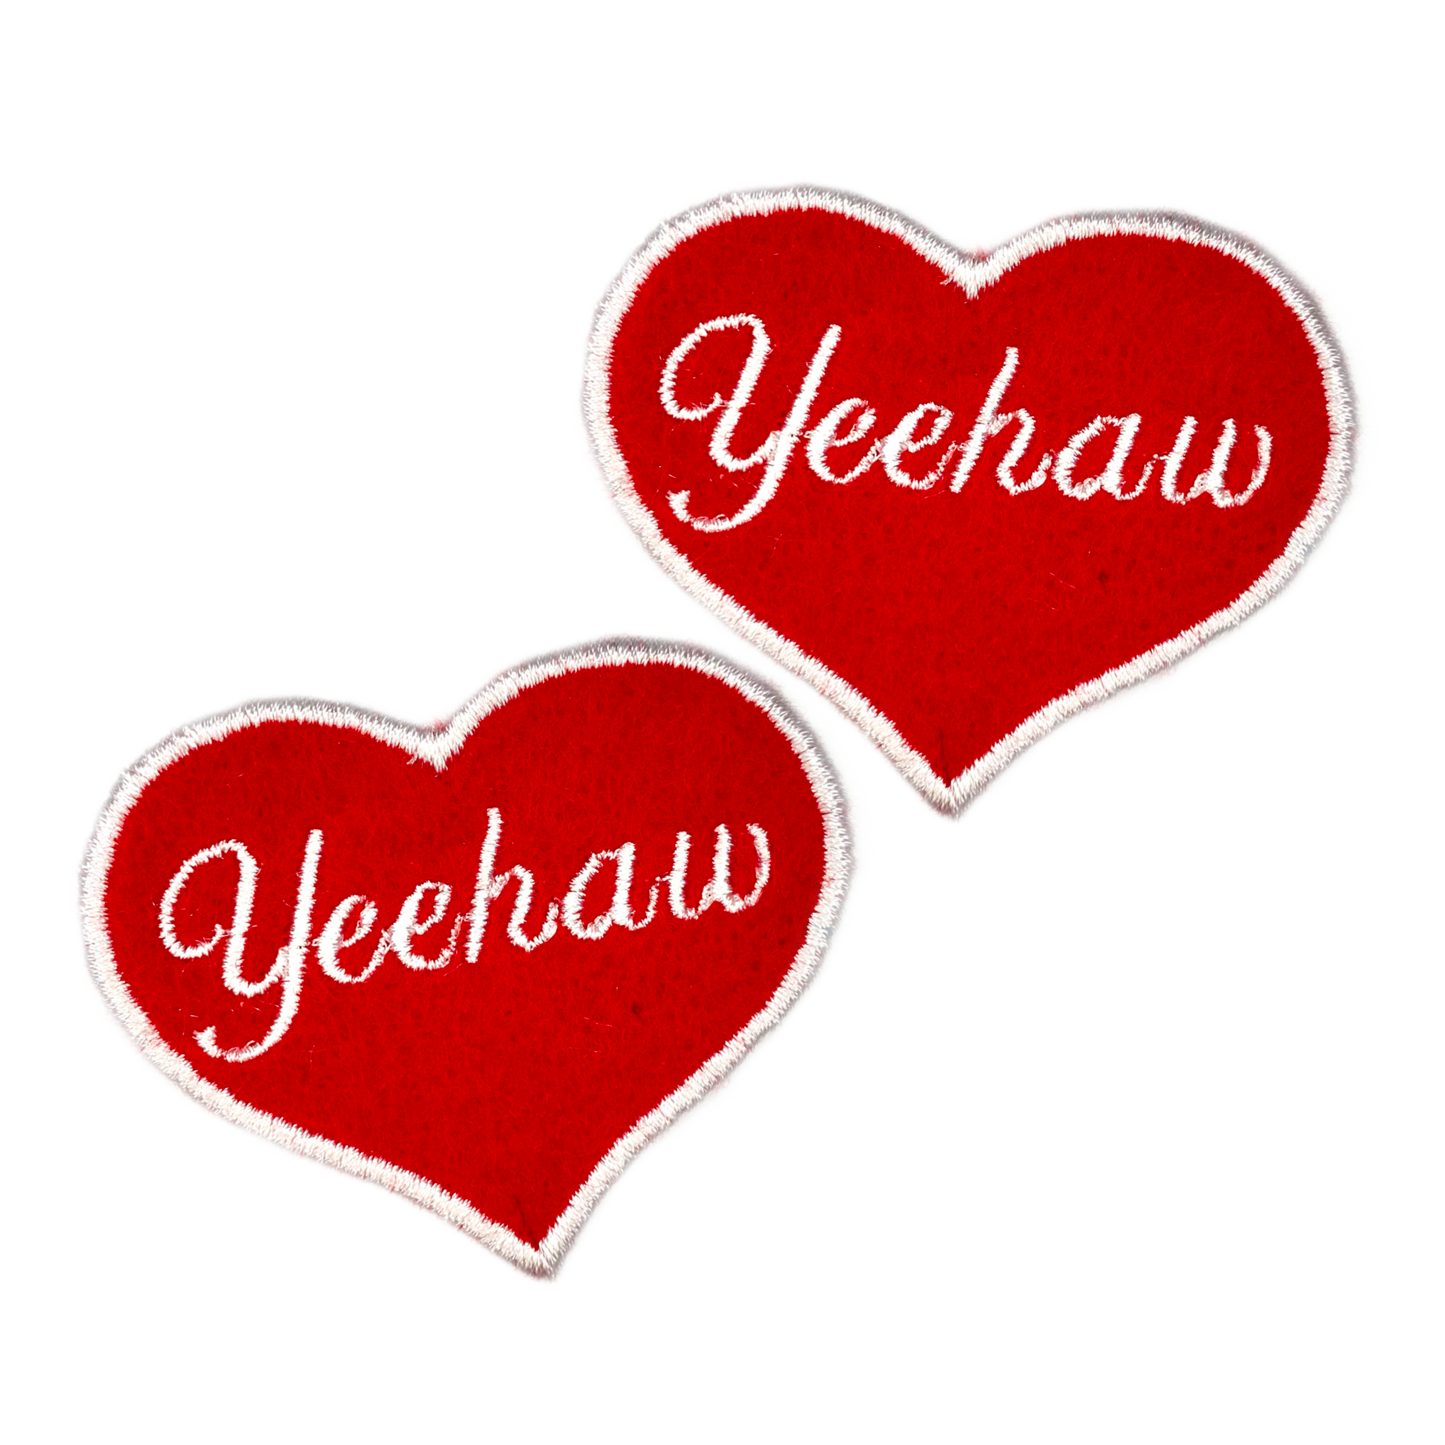 Yeehaw Cursive Red and Pink Heart Embroidered Iron-on Patch